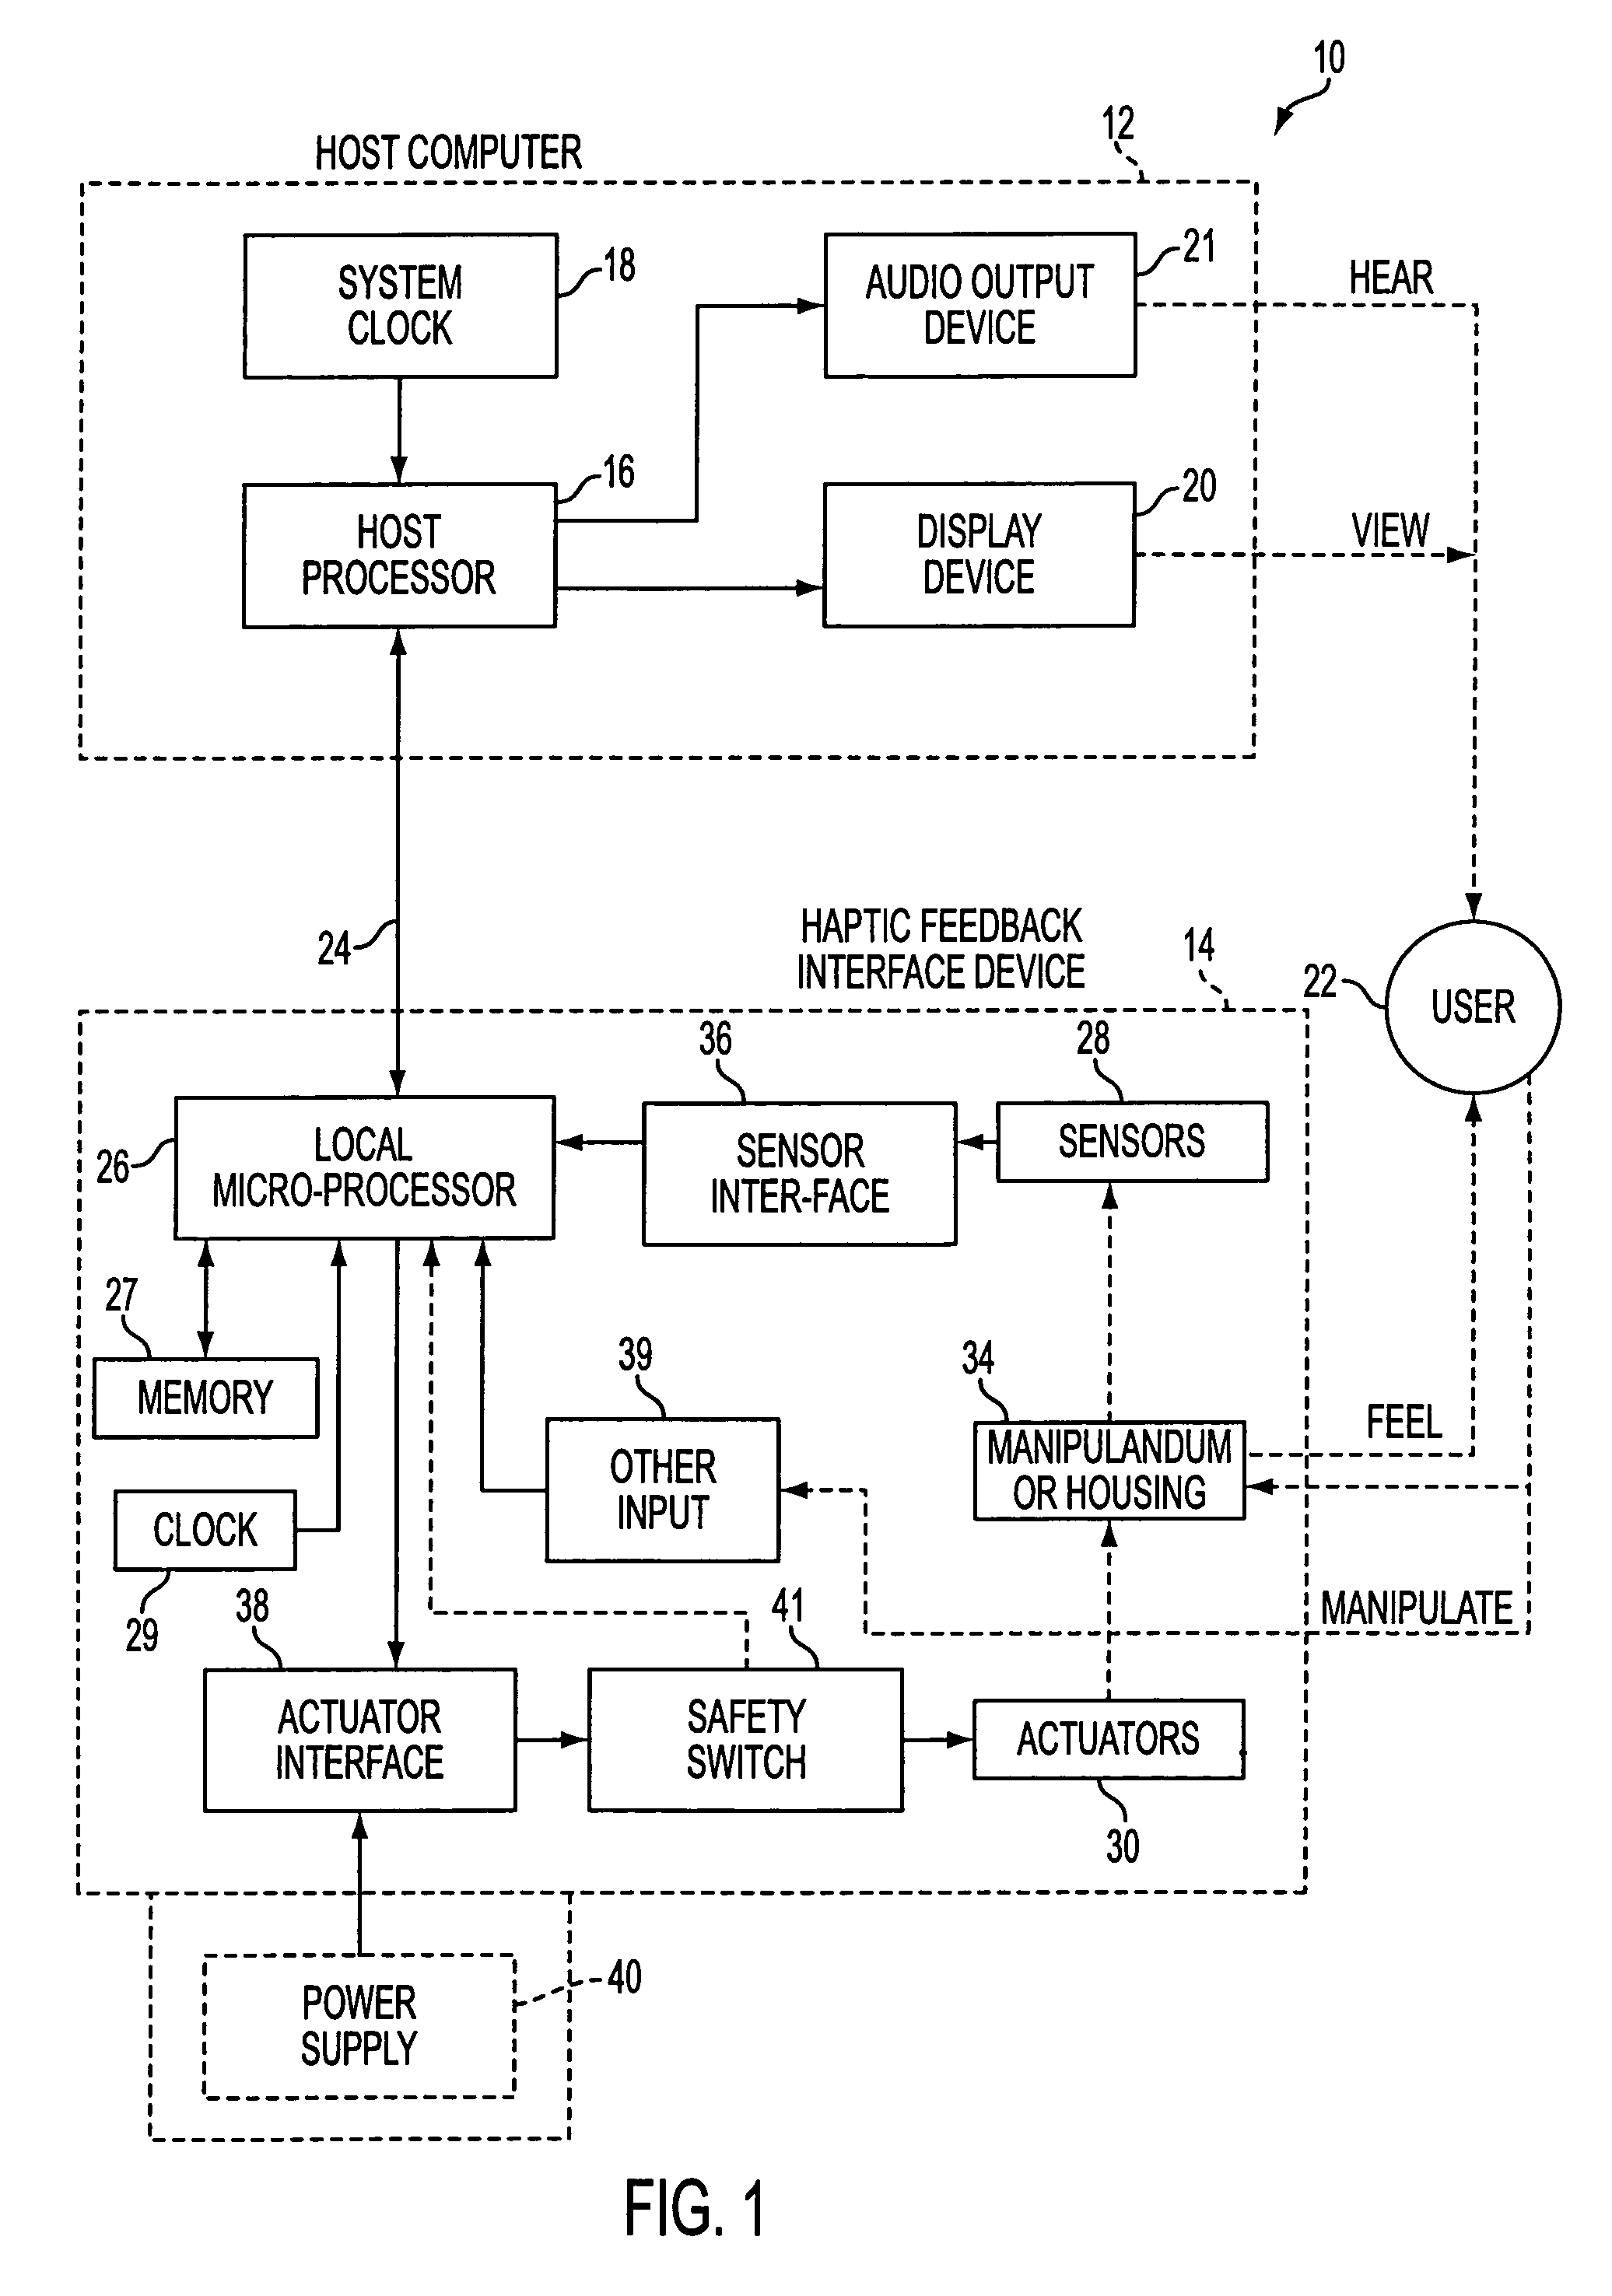 Hybrid control of haptic feedback for host computer and interface device